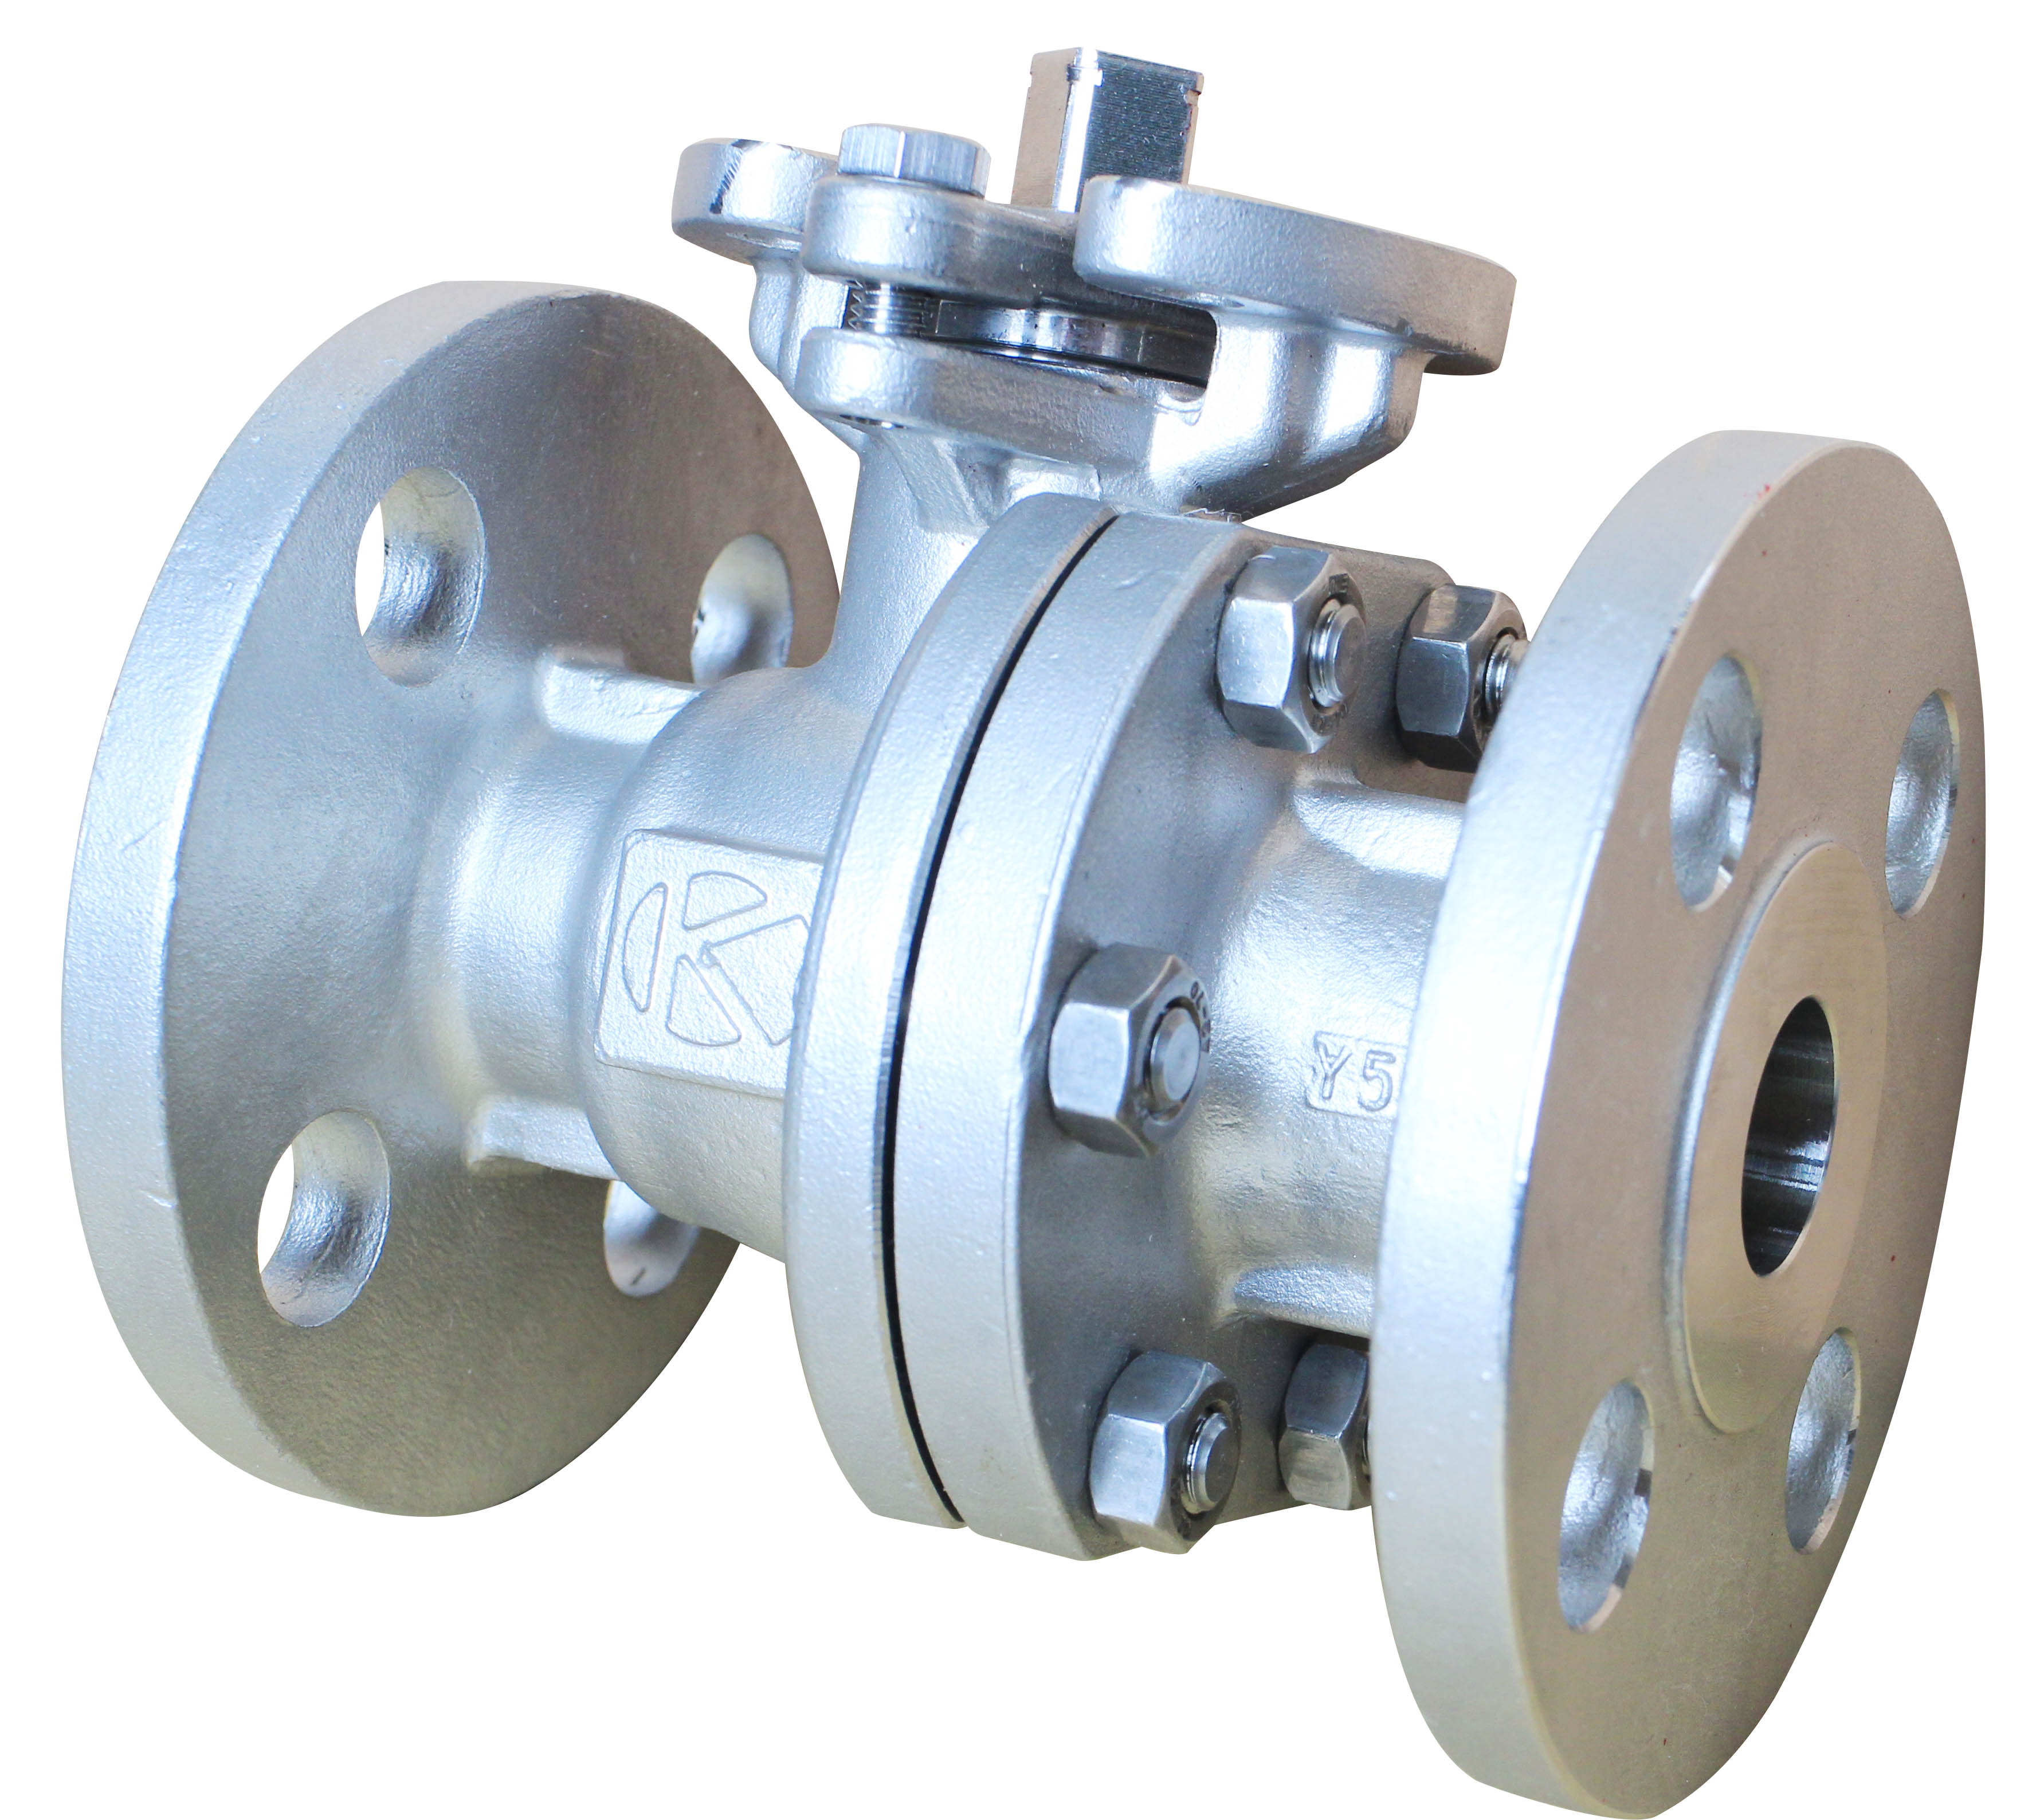 Double Flanged Ball Valves